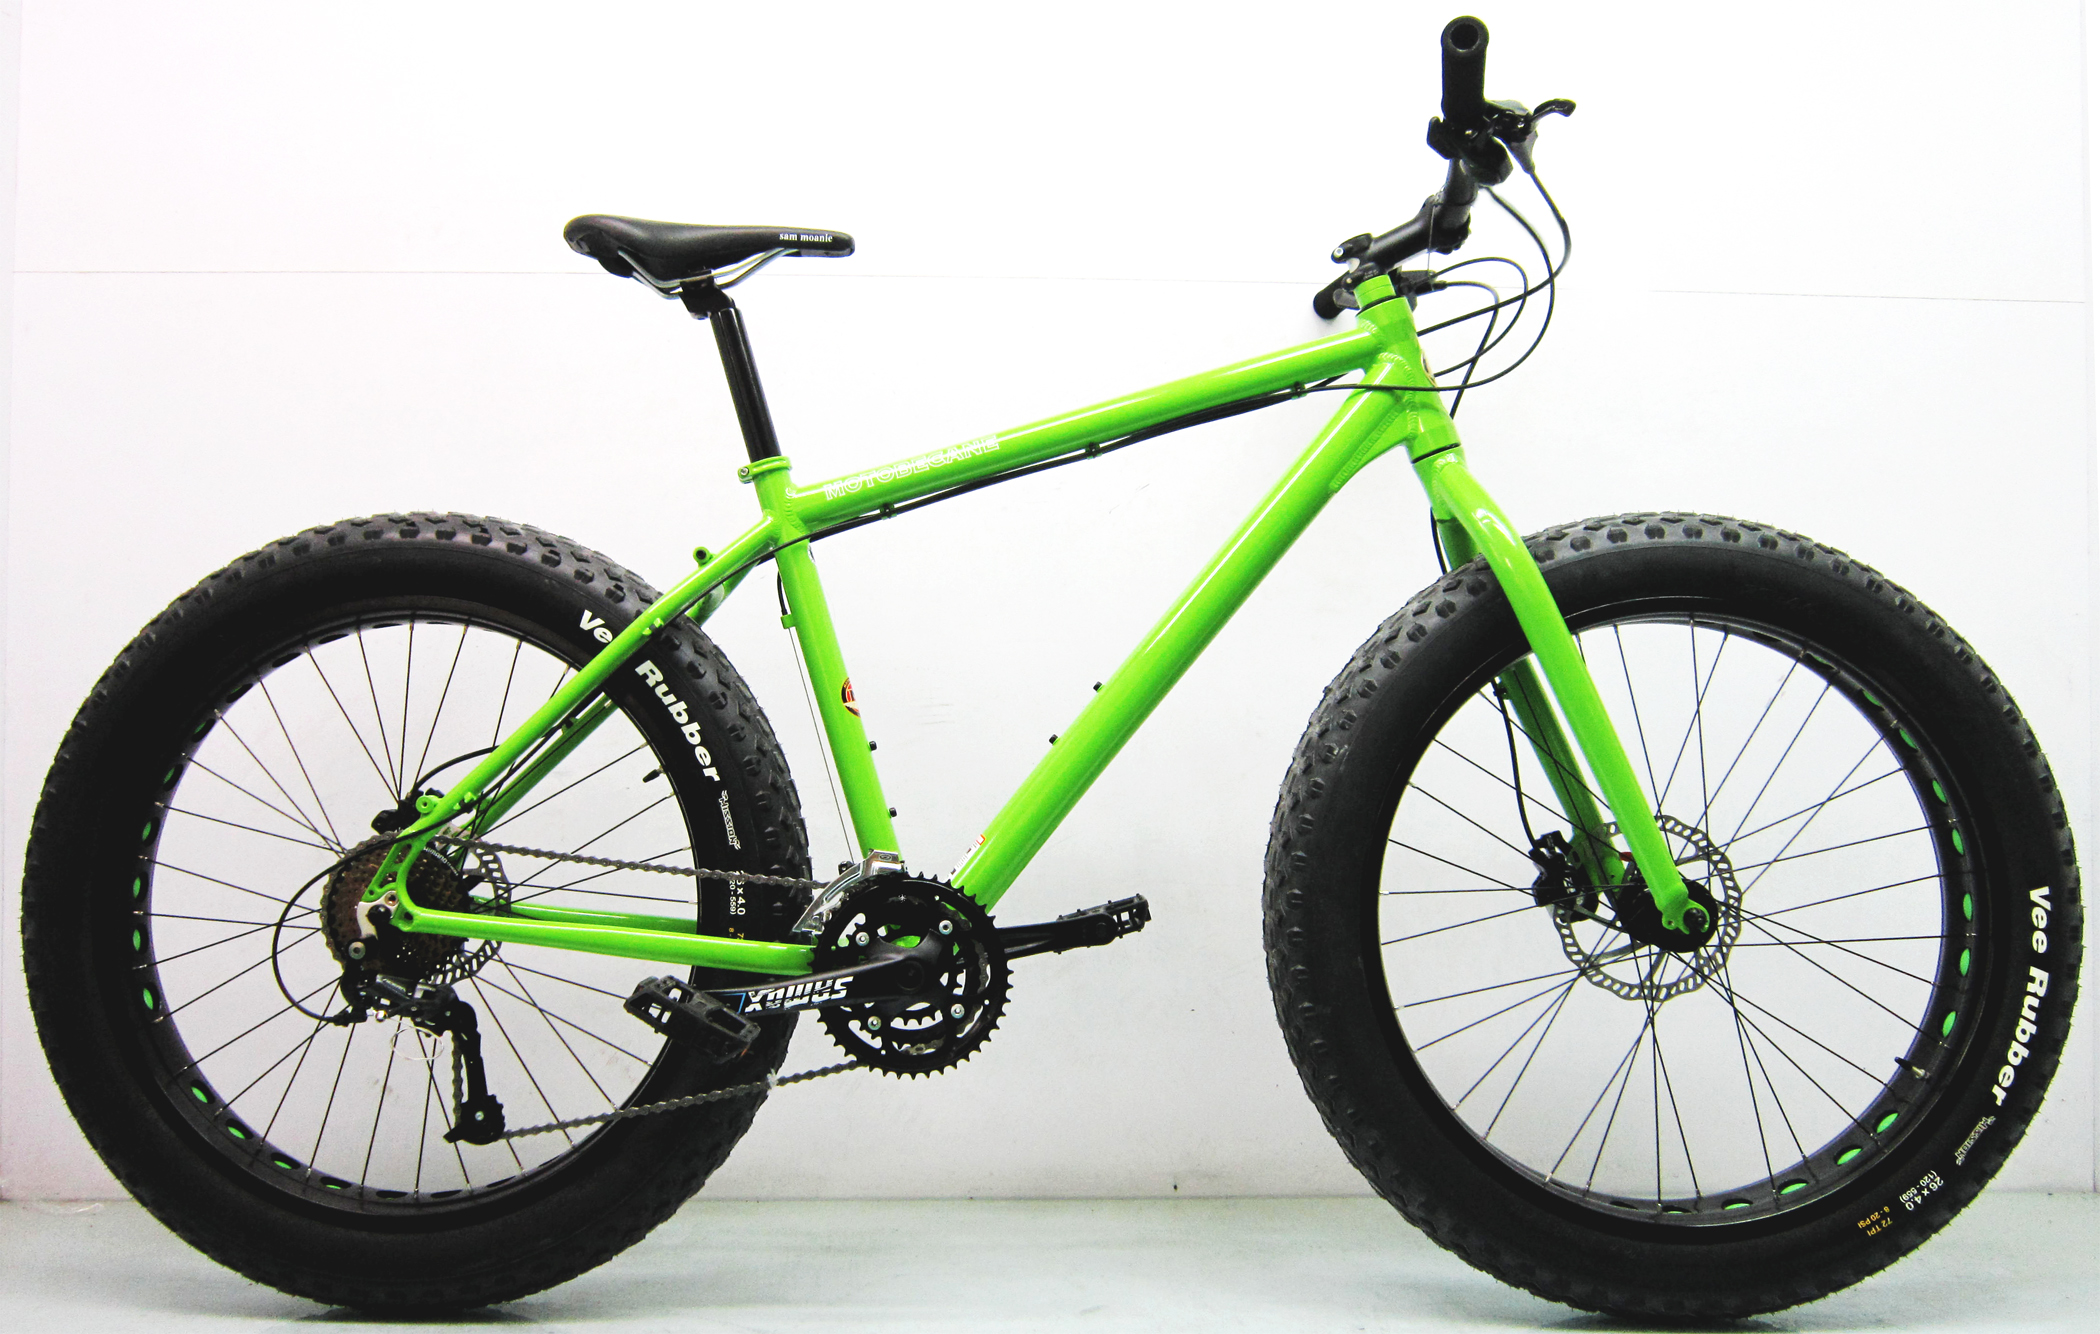 Save up to 60% off new Fat Bikes and Mountain Bikes - MTB - Motobecane ...